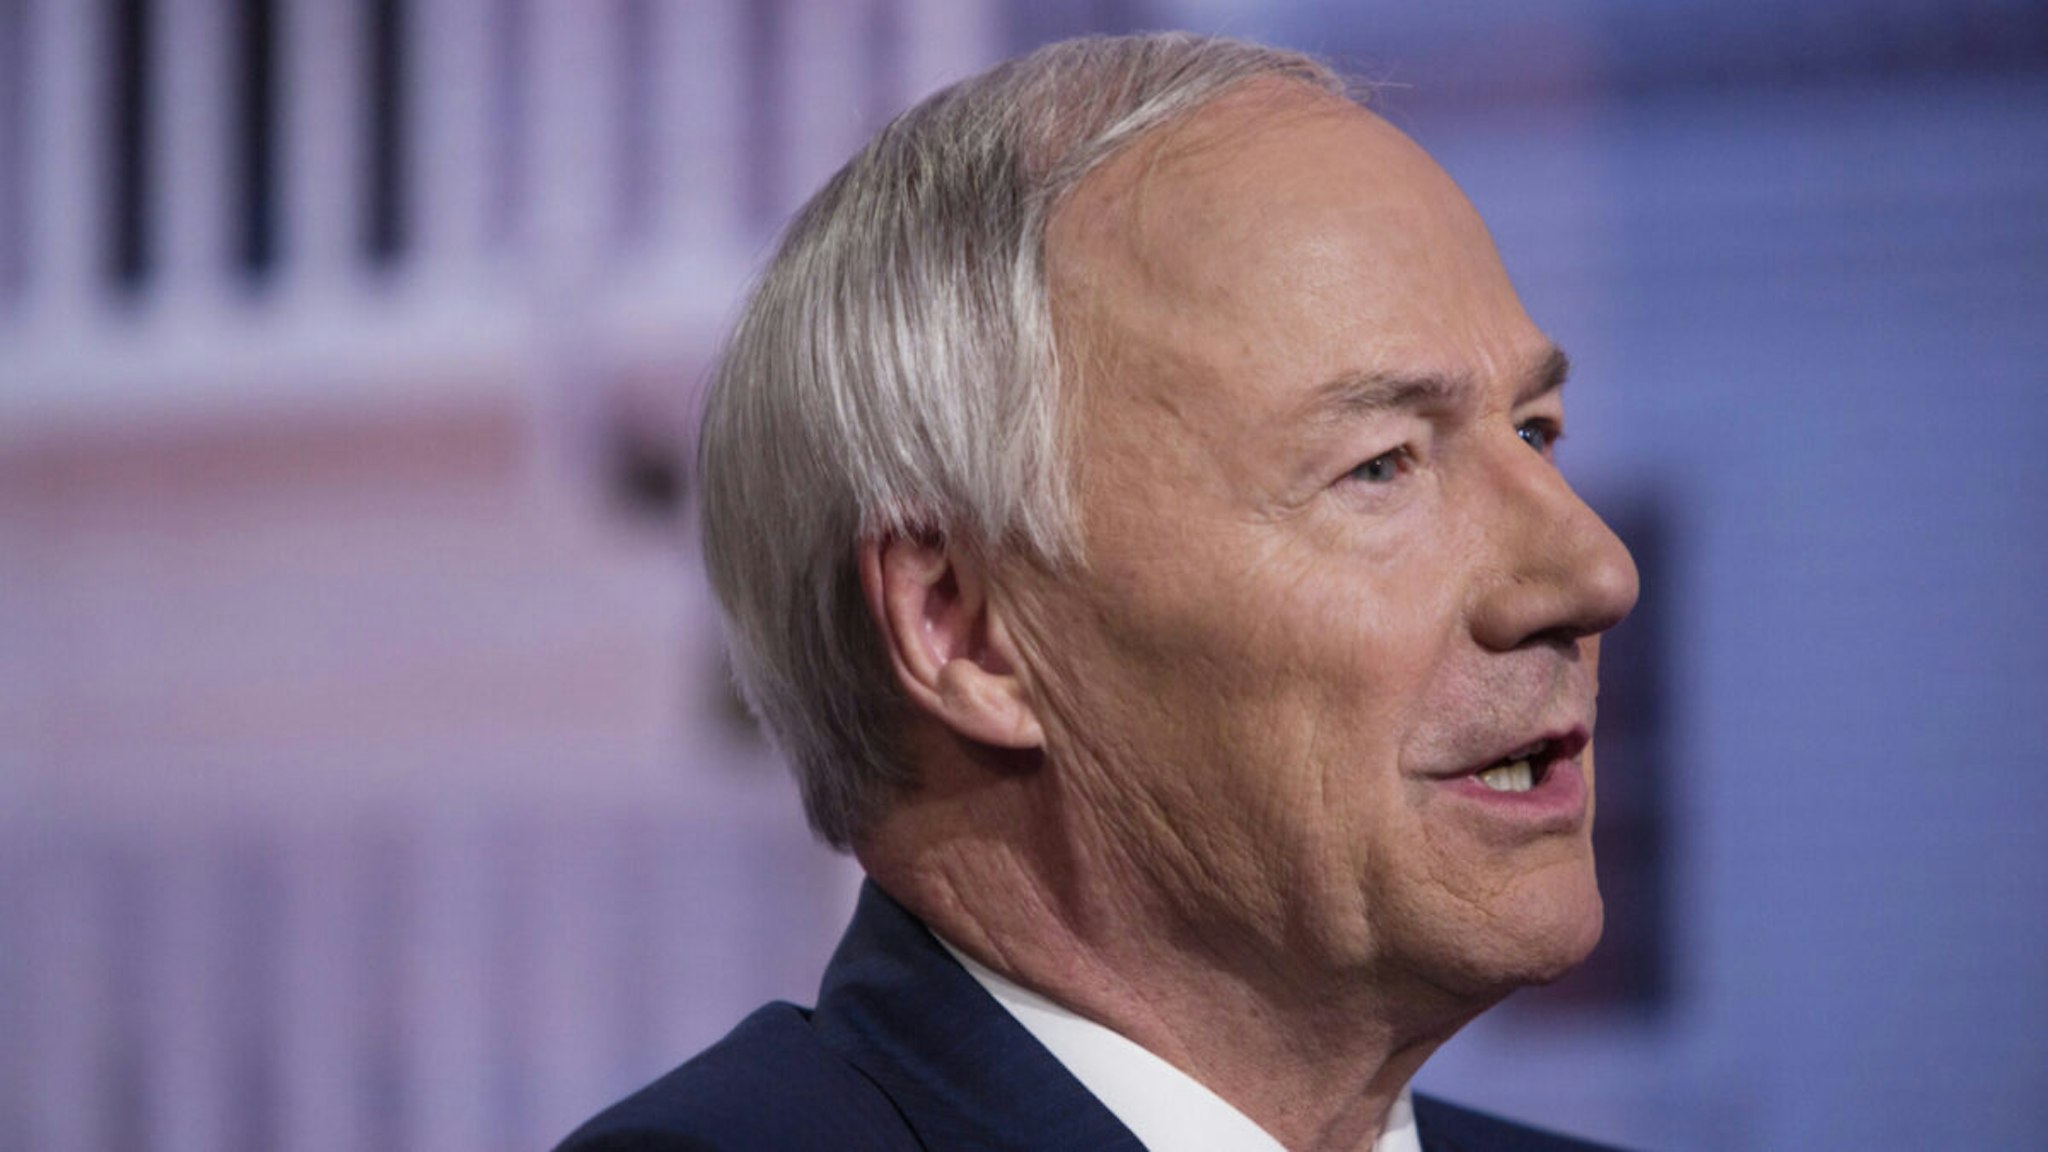 Asa Hutchinson, governor of Arkansas, speaks during a Bloomberg Television interview in New York, U.S., on Tuesday, May 28, 2019.